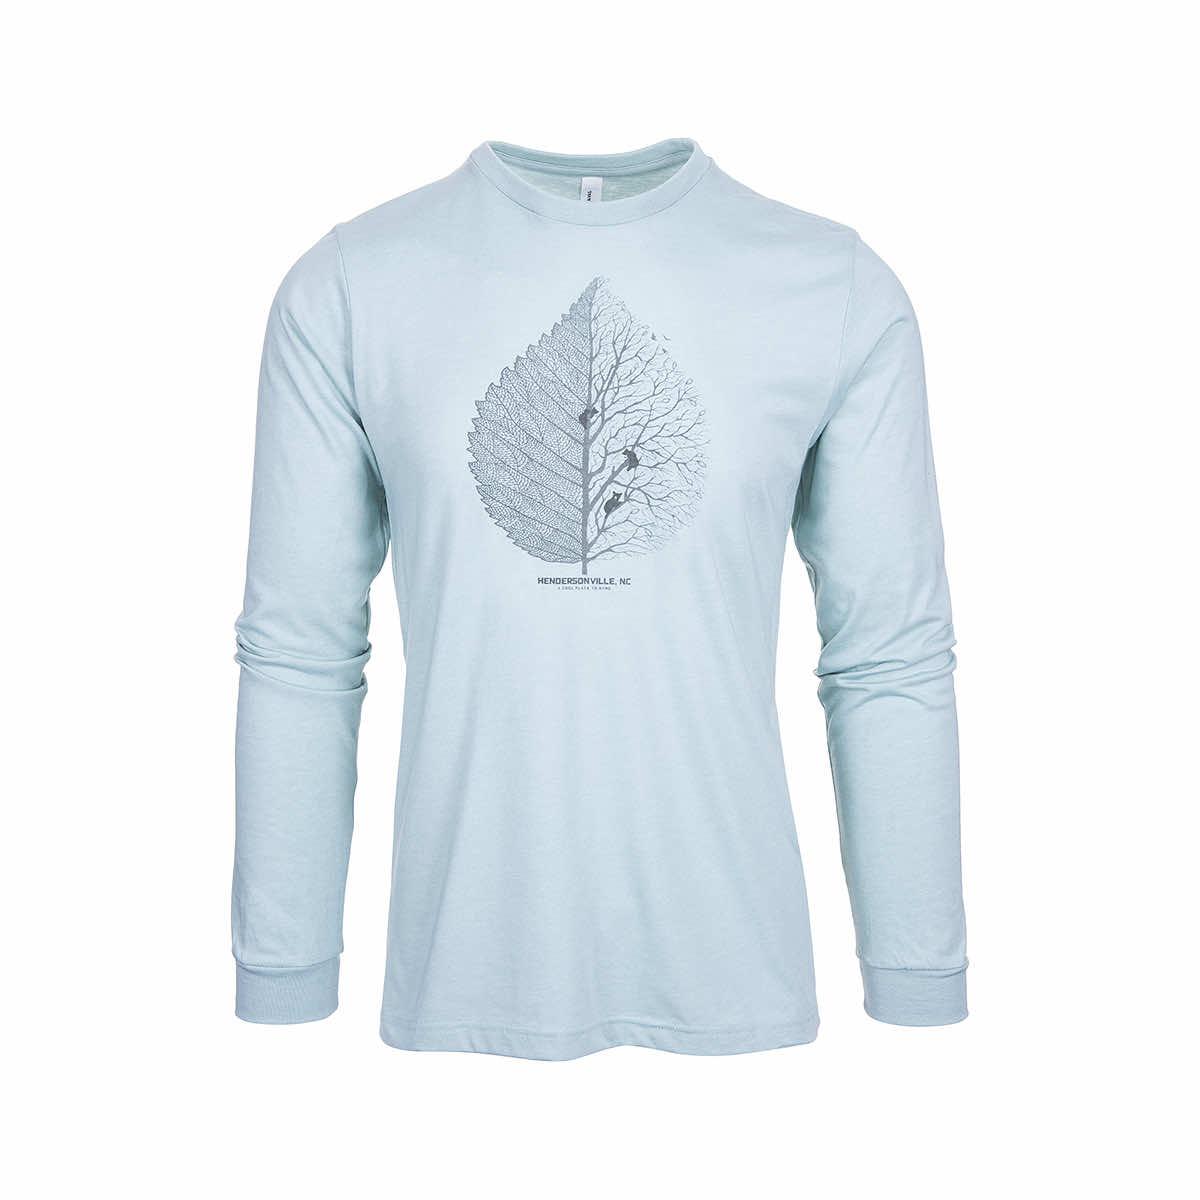  Hendersonville Nc Cool Place To Hang Long Sleeve T- Shirt